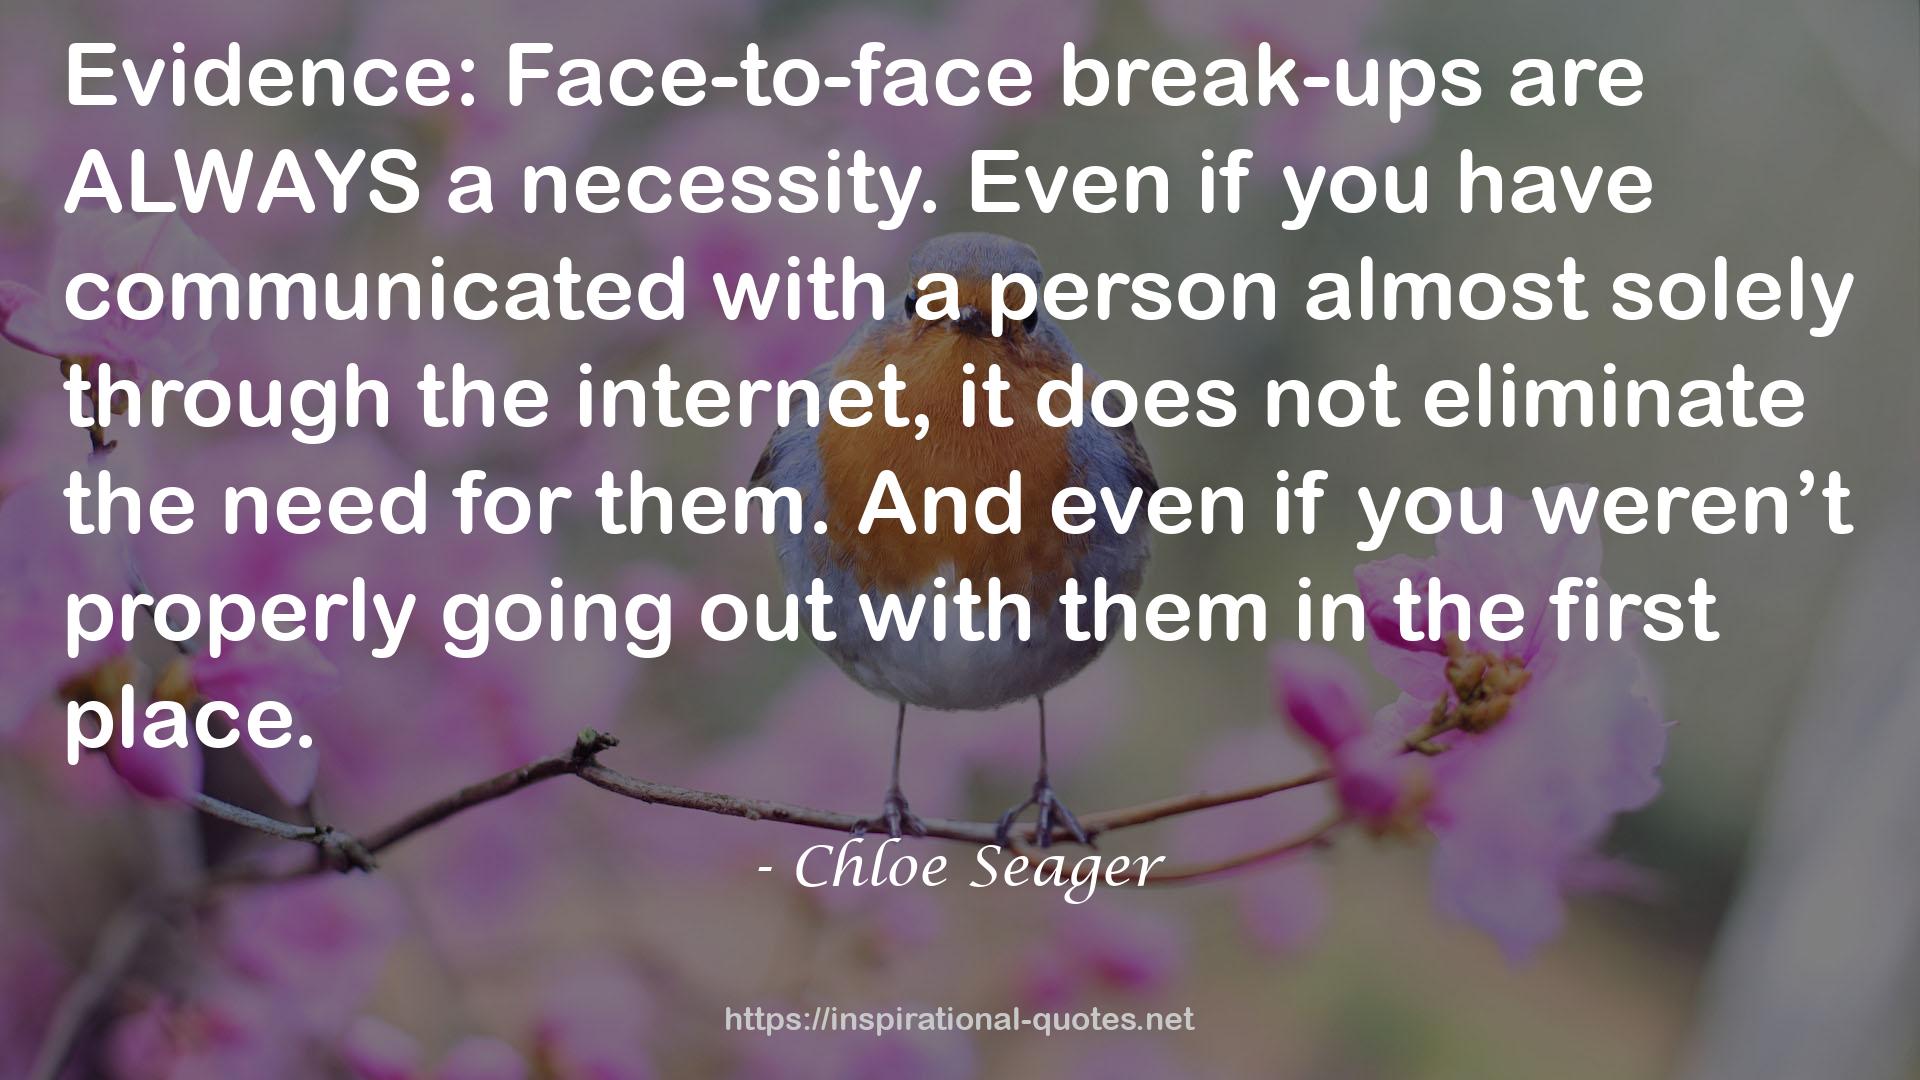 Chloe Seager QUOTES